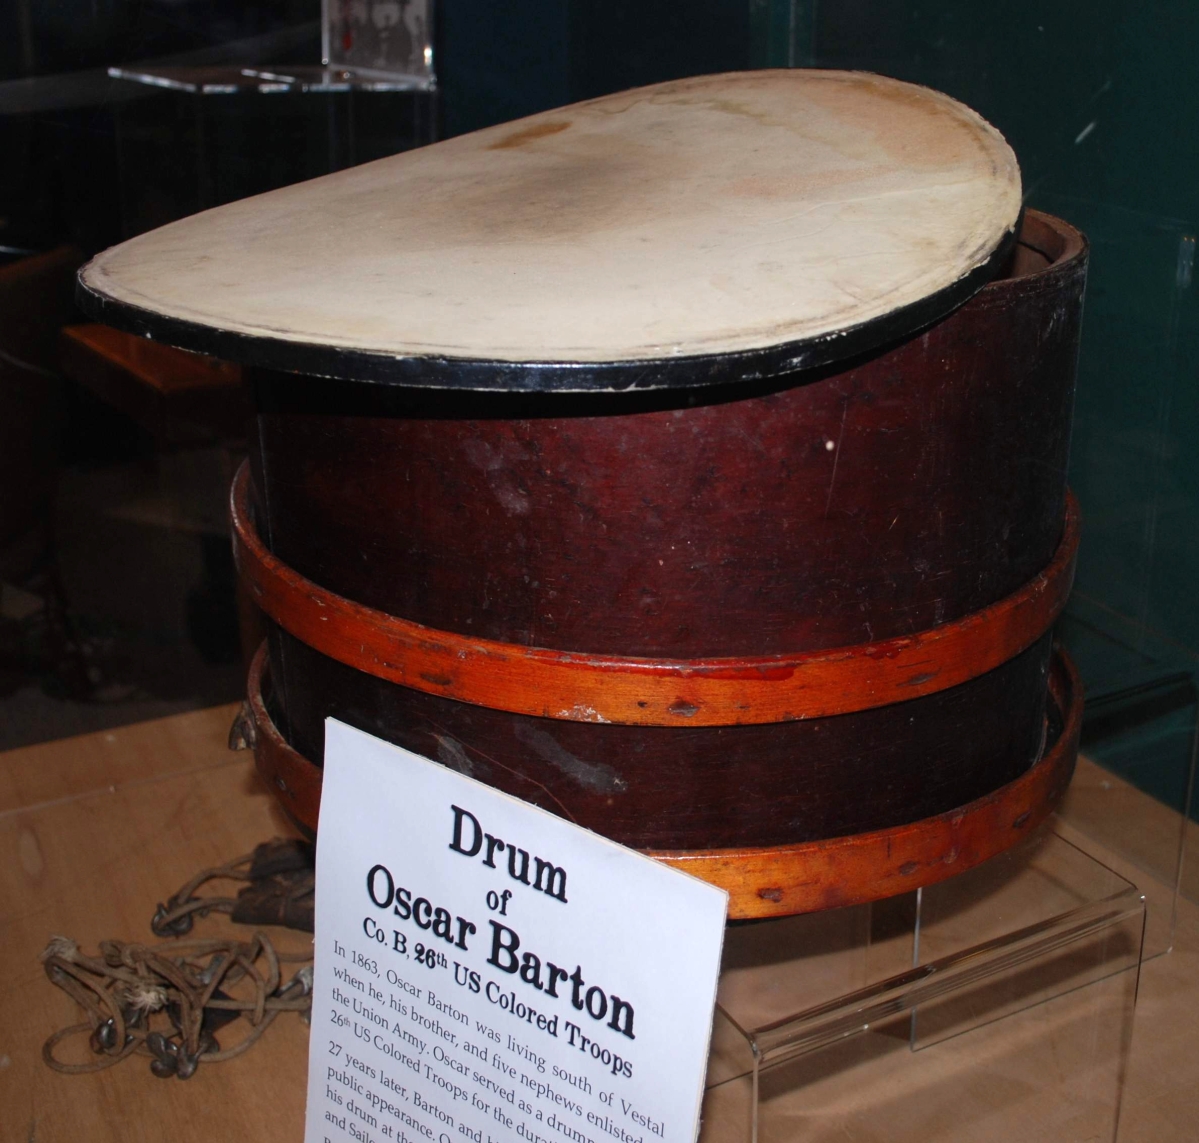 Barton’s drum was significantly damaged in a 2011 flood that affected the downtown region of Owego where the Tioga County Museum is located.